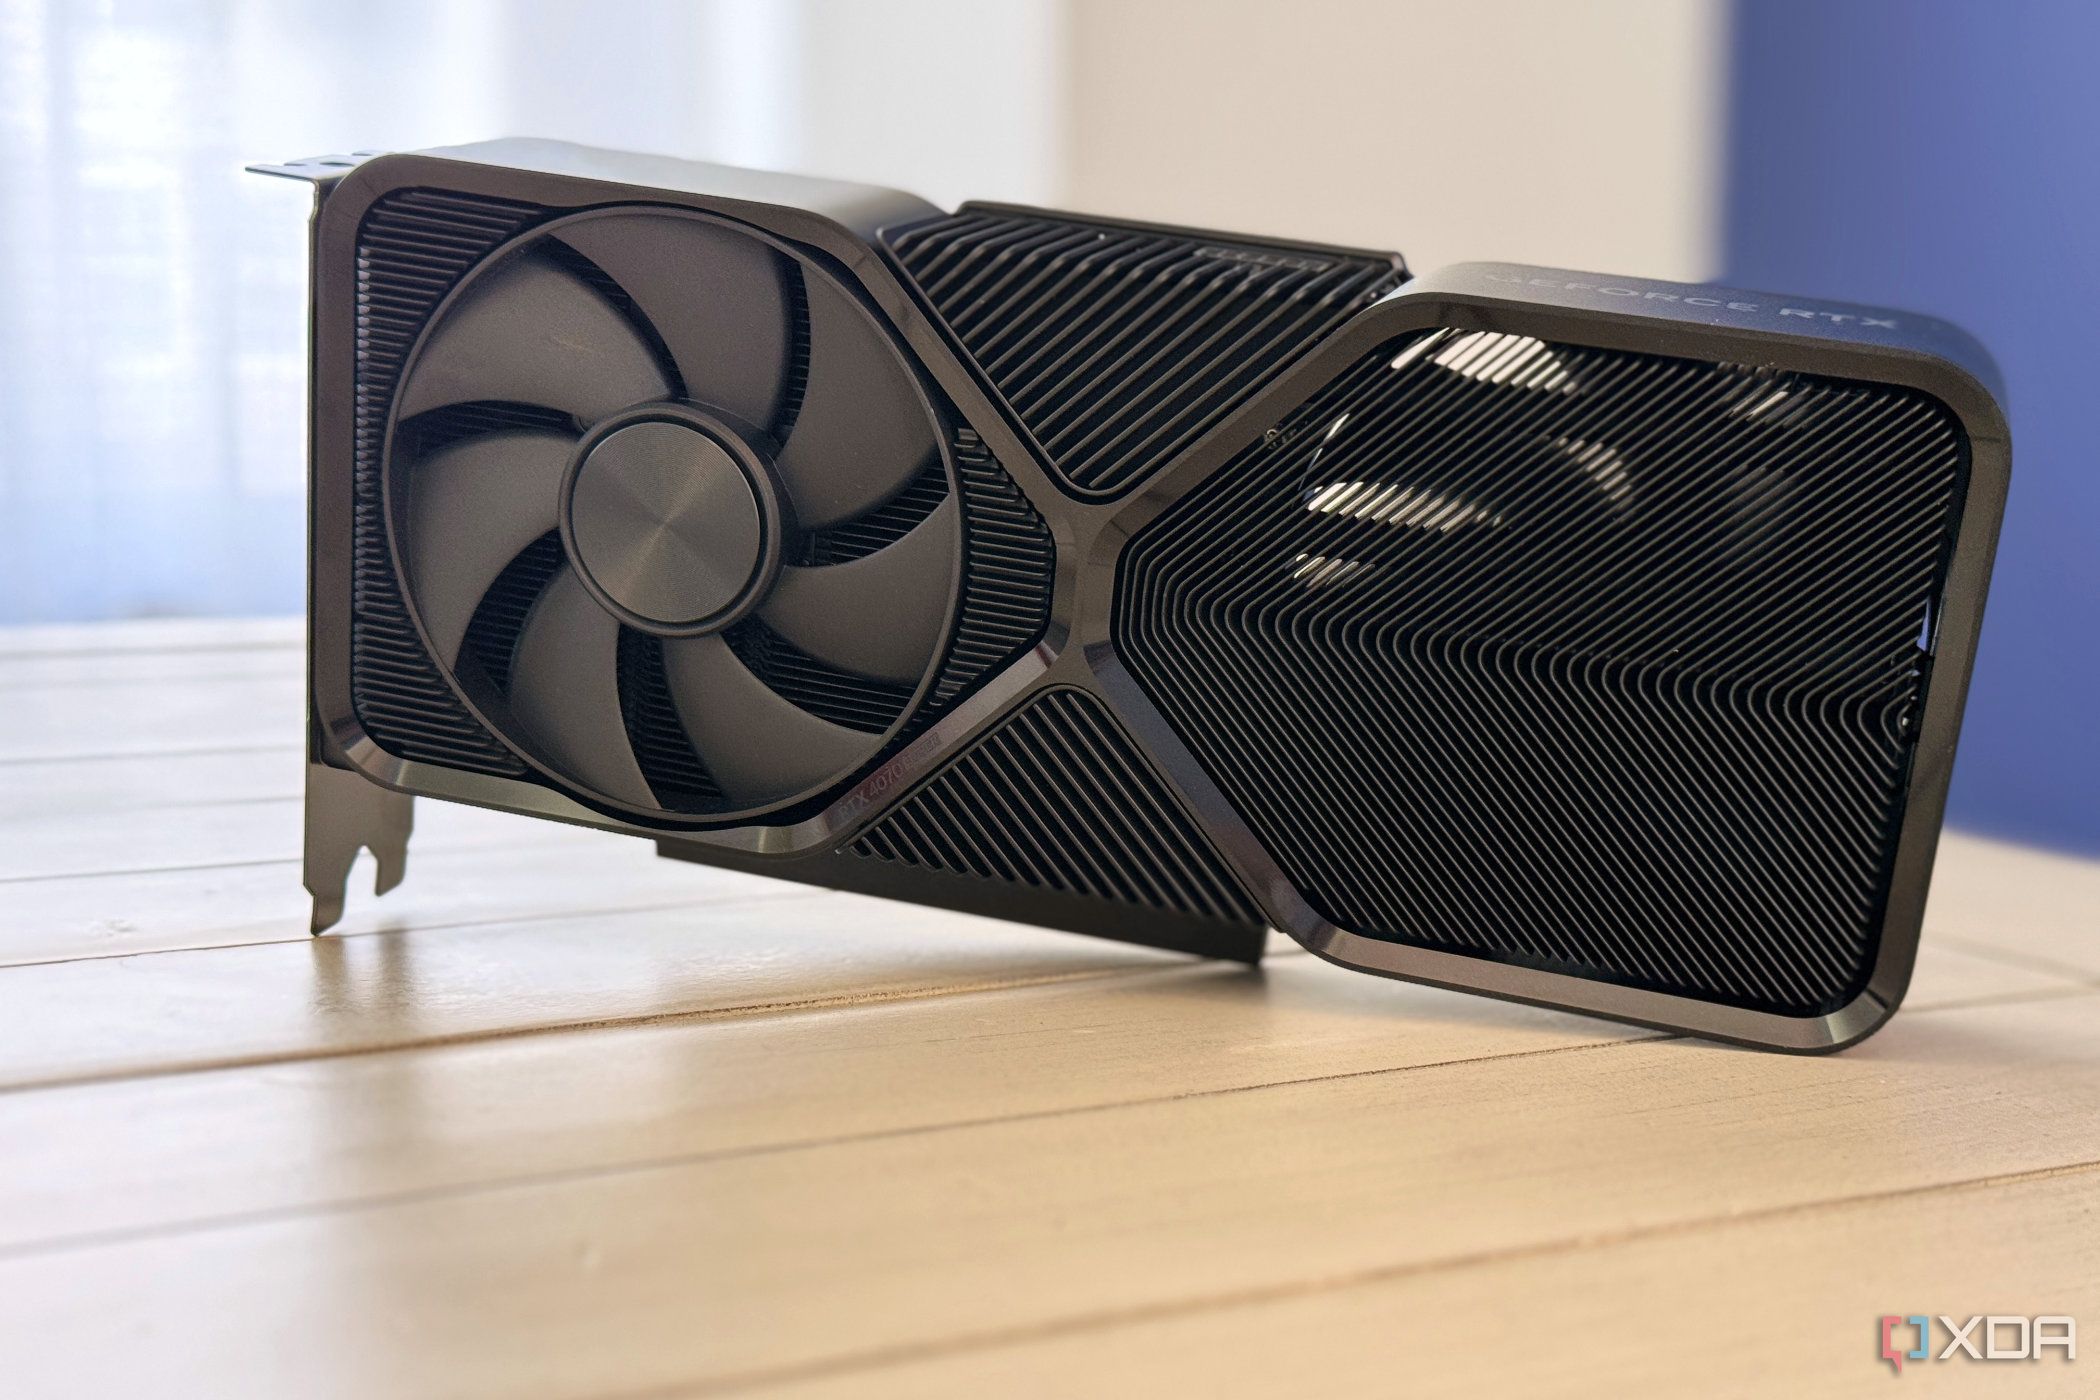 nvidia geforce rtx 4070 super founders edition stood up on table with light coming through the heatsink